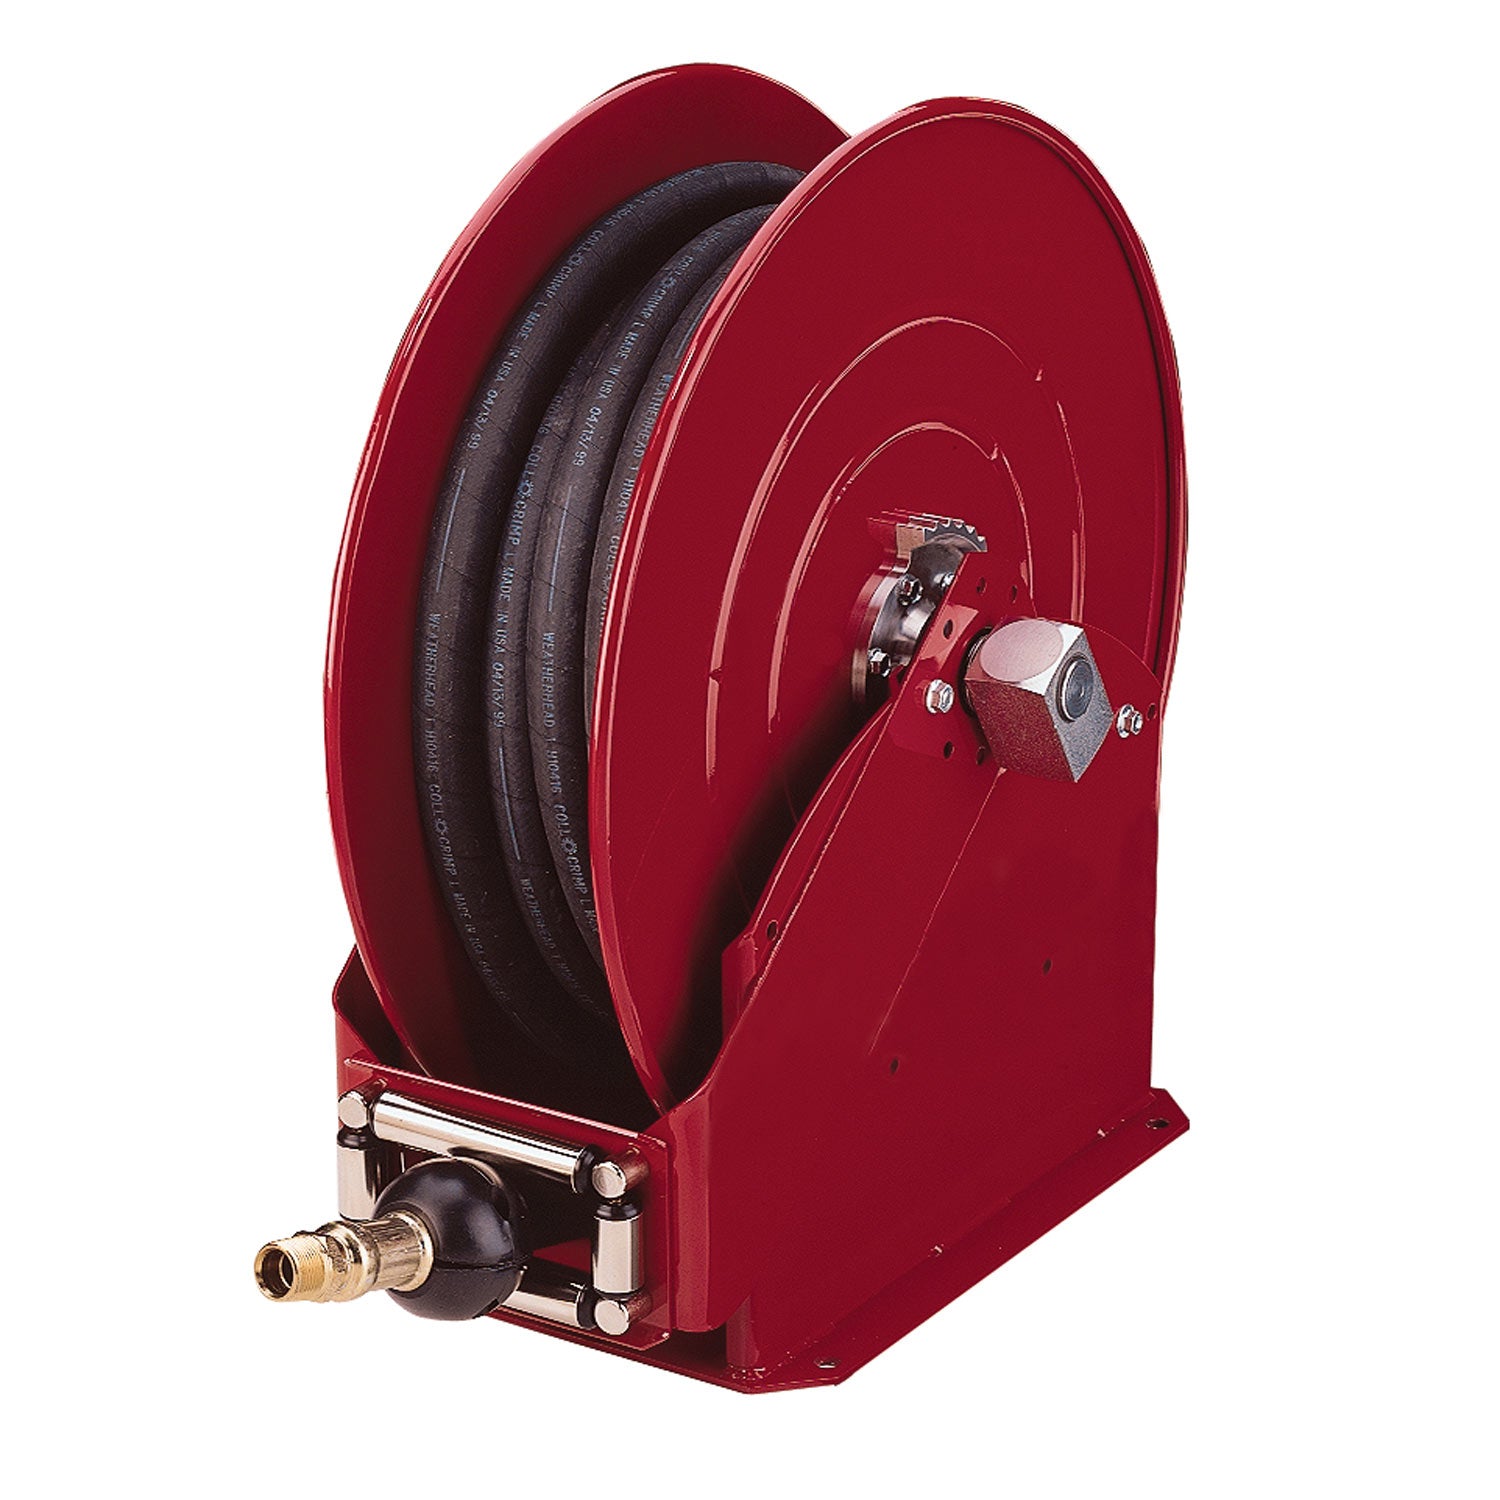 Alemite 8079-F, Air/Water Shielded Hose Reel with 317803-50